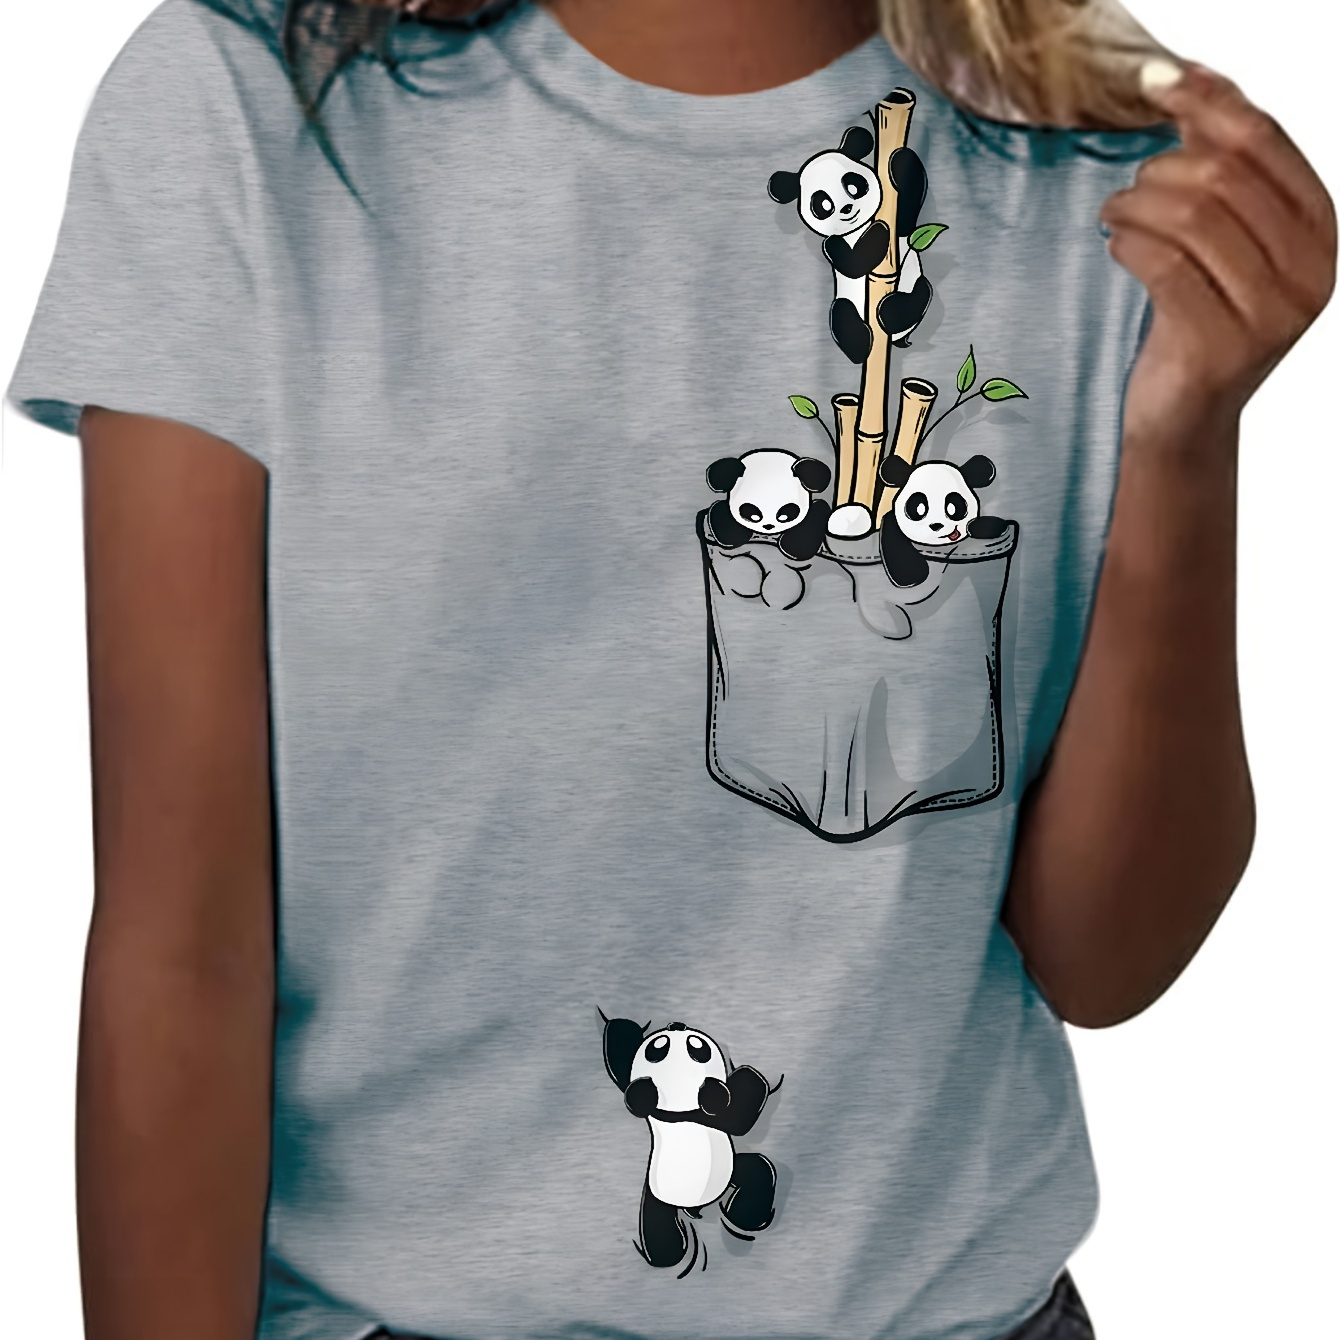 

Panda Print Crew Neck T-shirt, Casual Short Sleeve Top For Spring & Summer, Women's Clothing